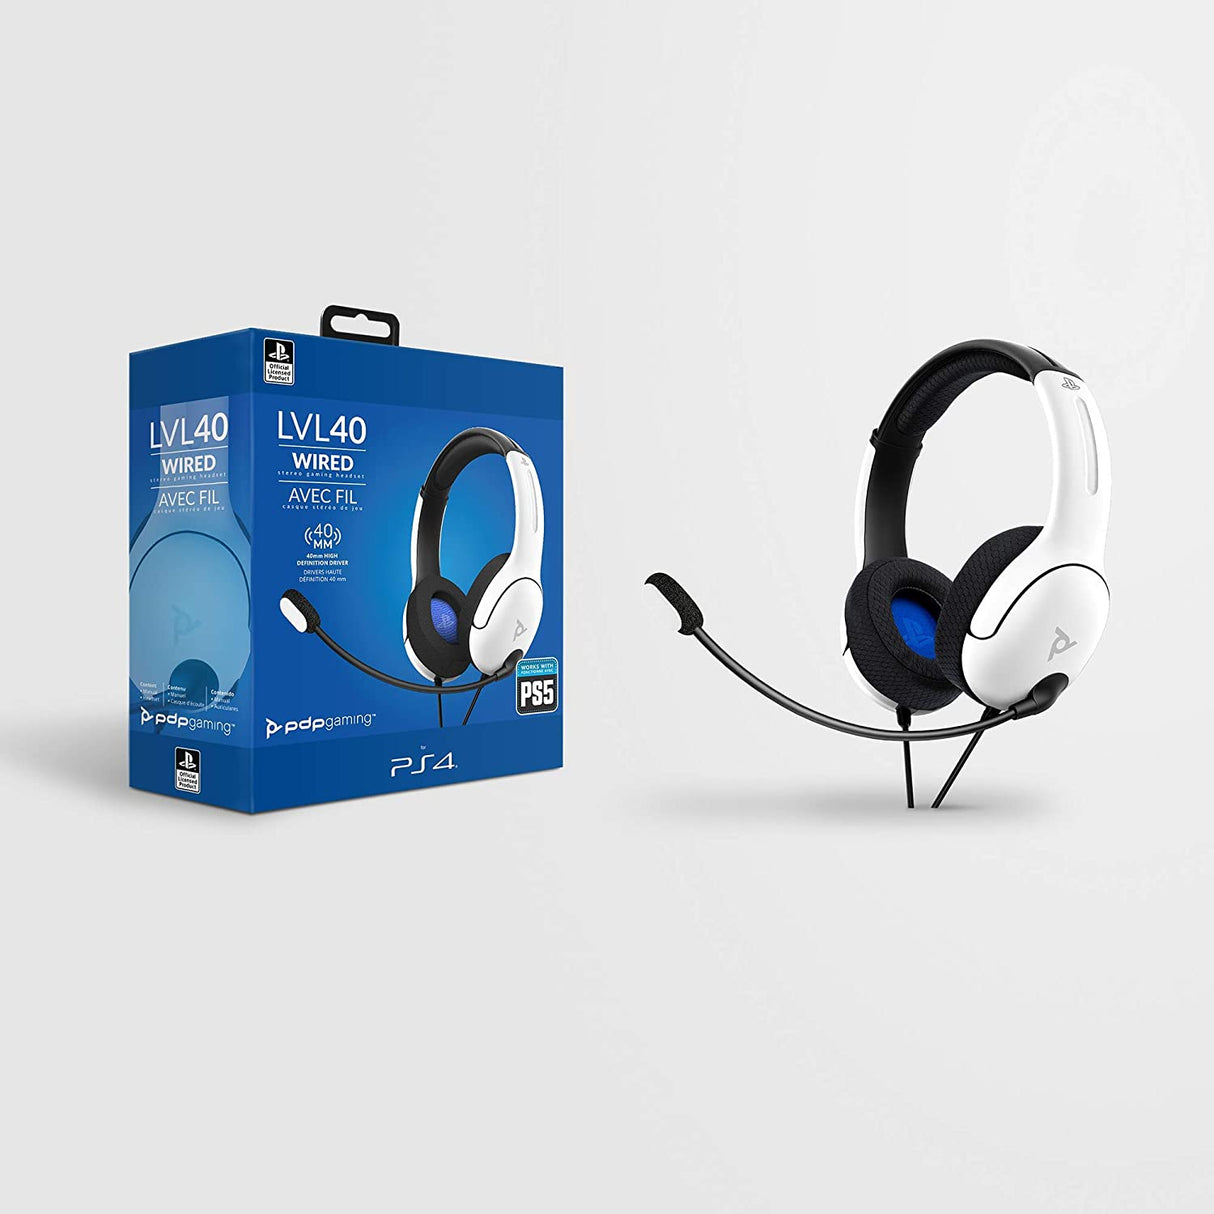 PDP LVL40 Wired Stereo Gaming Headset for PlayStation - White/Black - Refurbished Excellent